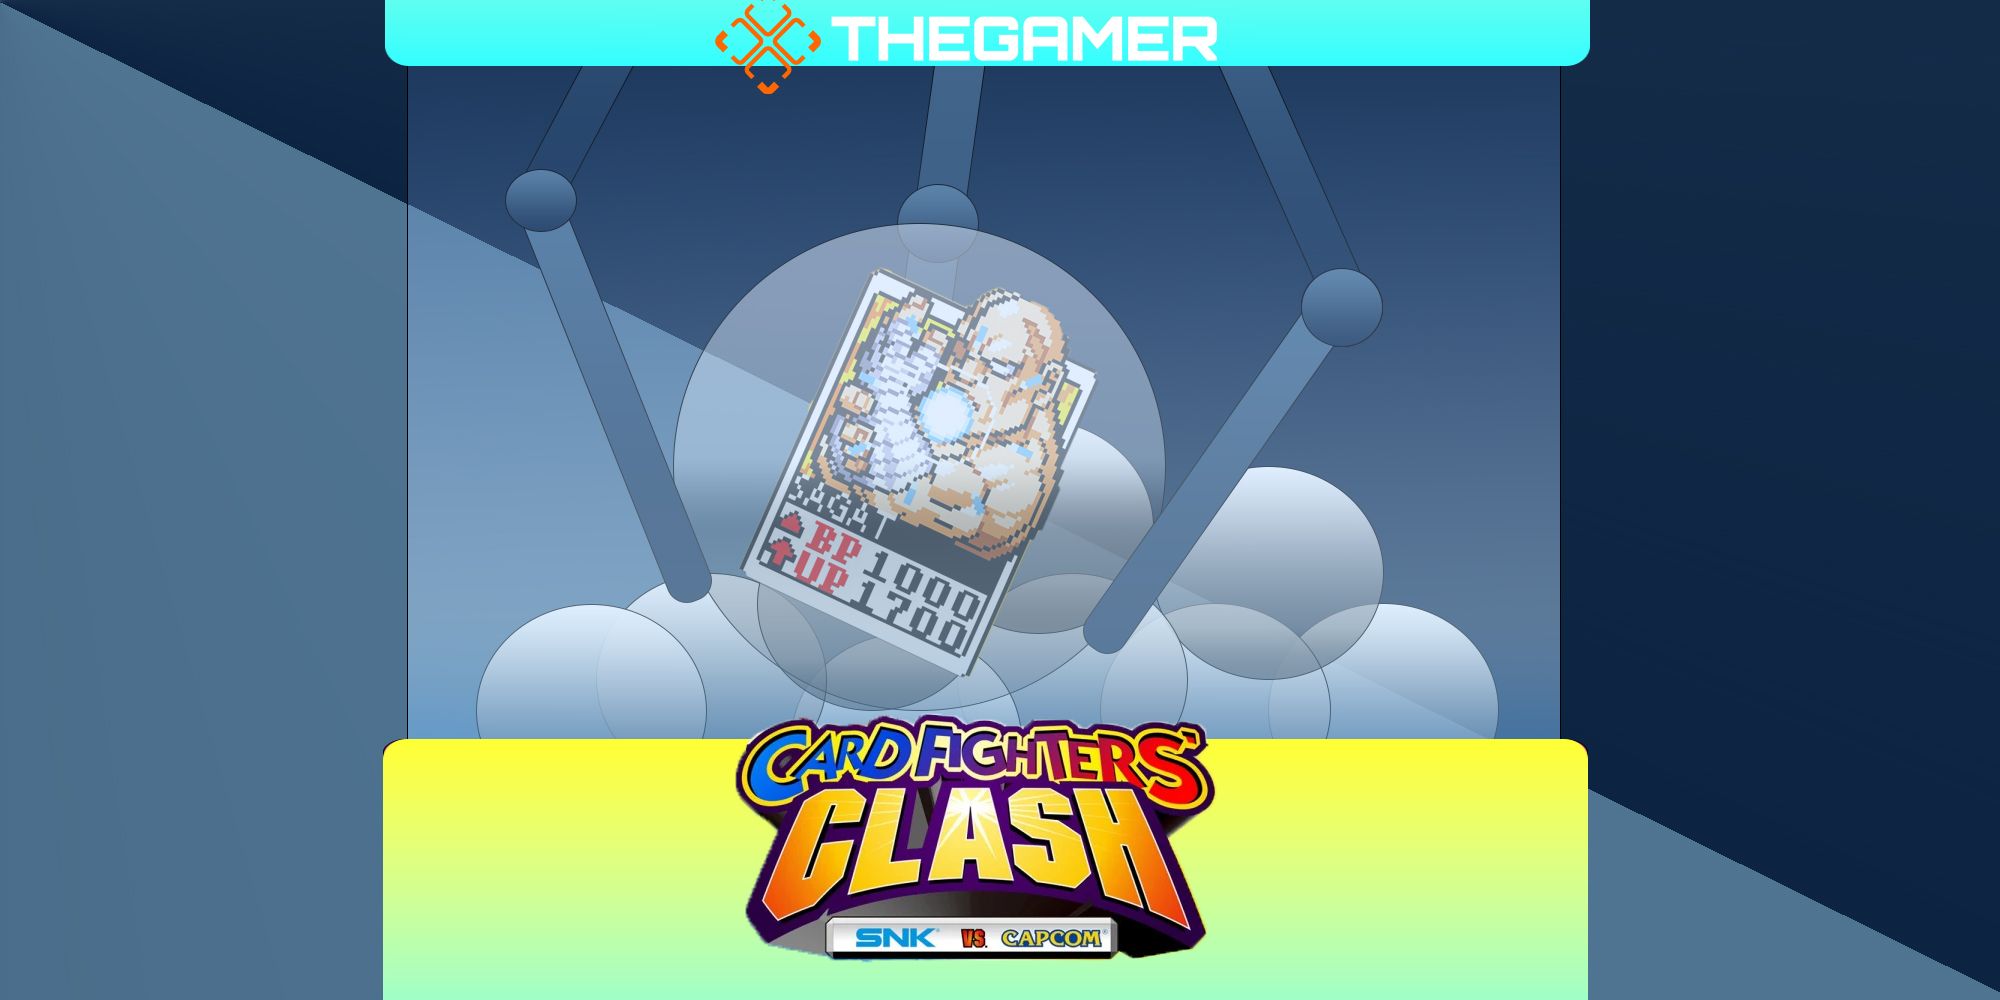 A custom image of a Crain game machine claw holding a Sagat character card from SNK VS Capcom: Card Fighters' Clash.